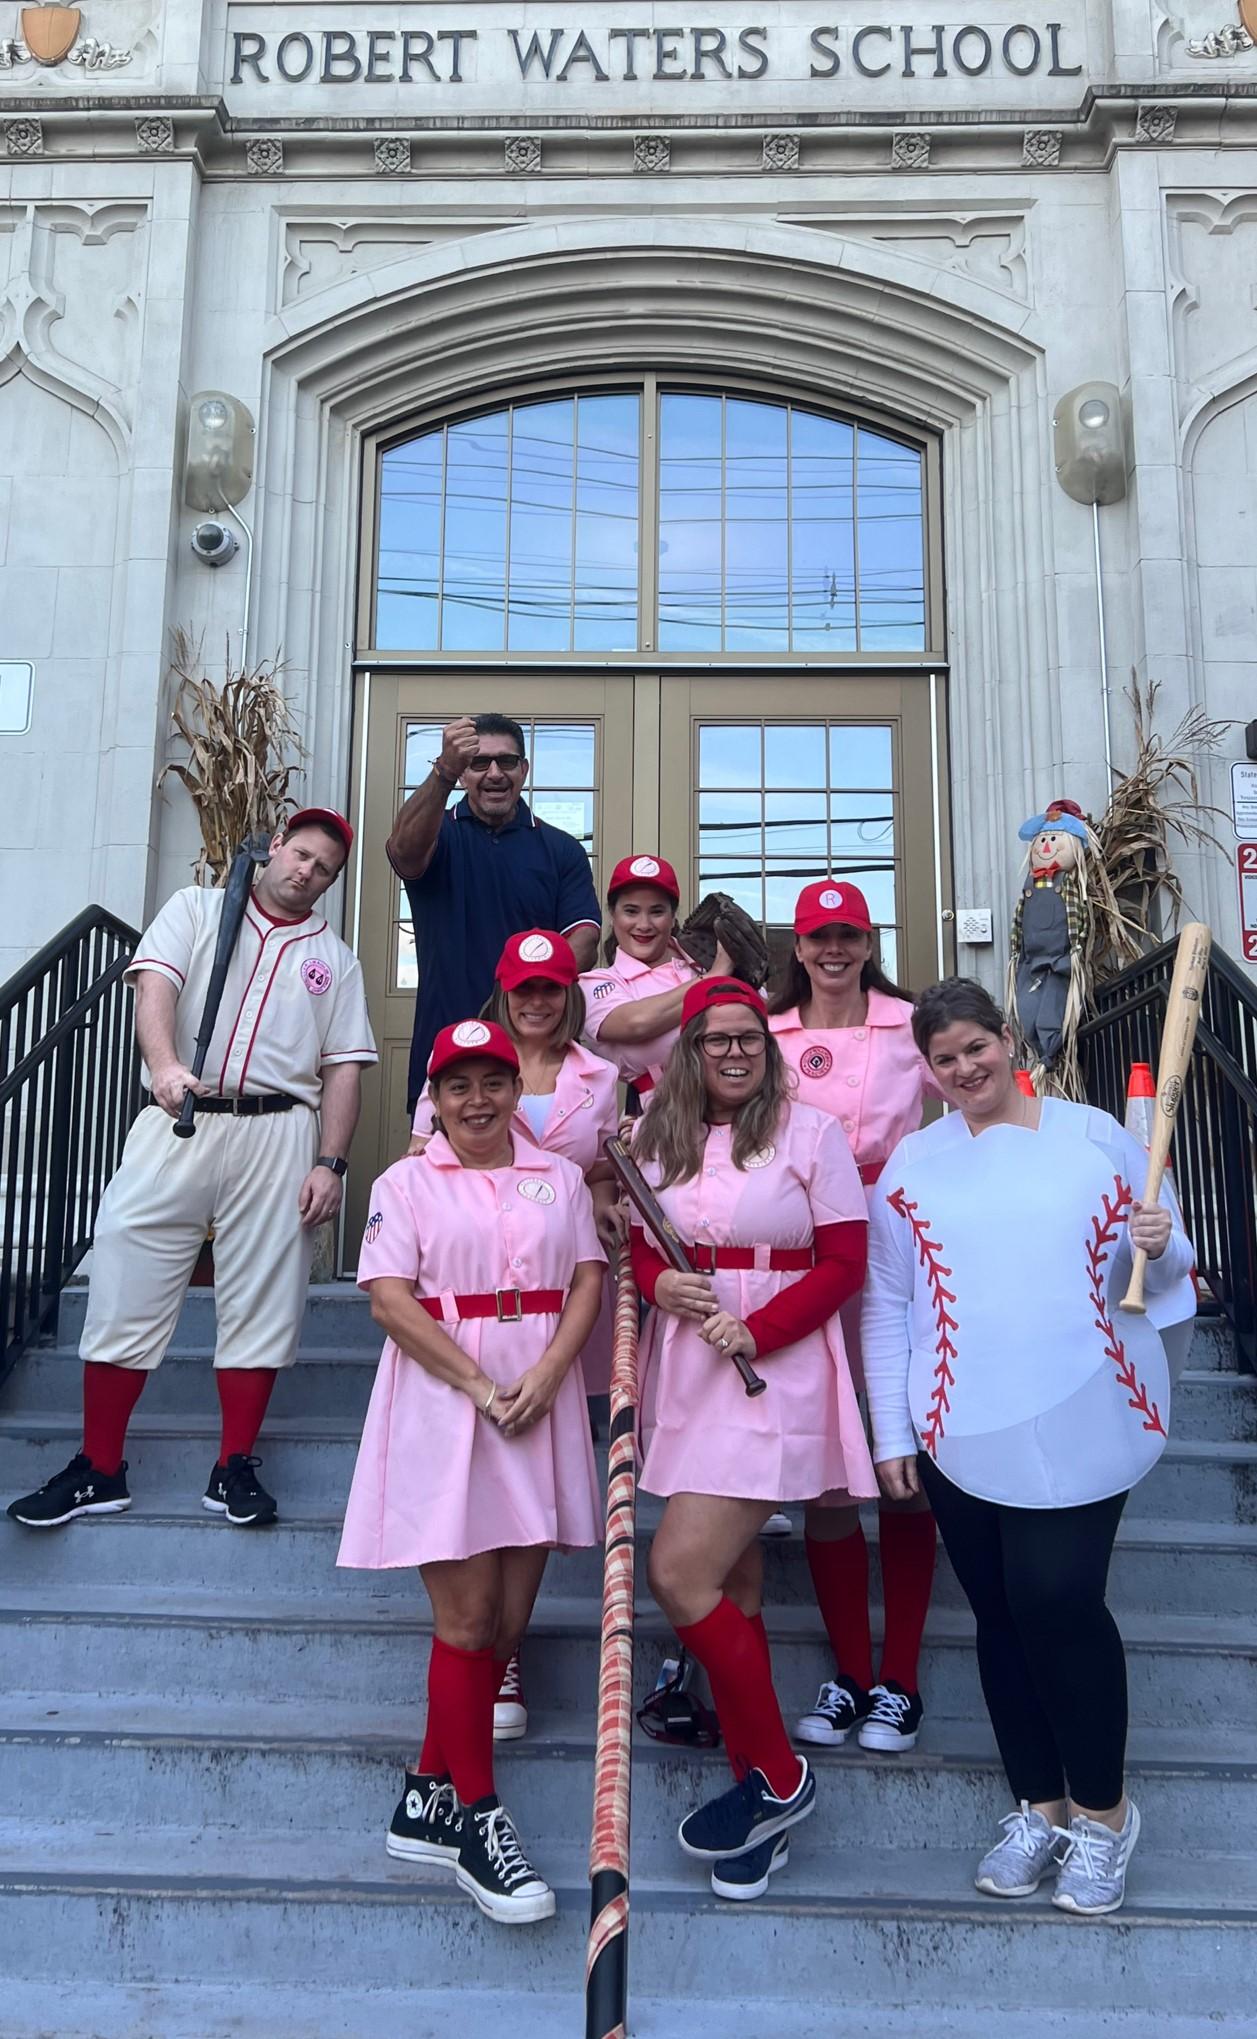 A League of their Own at the Robert Waters School